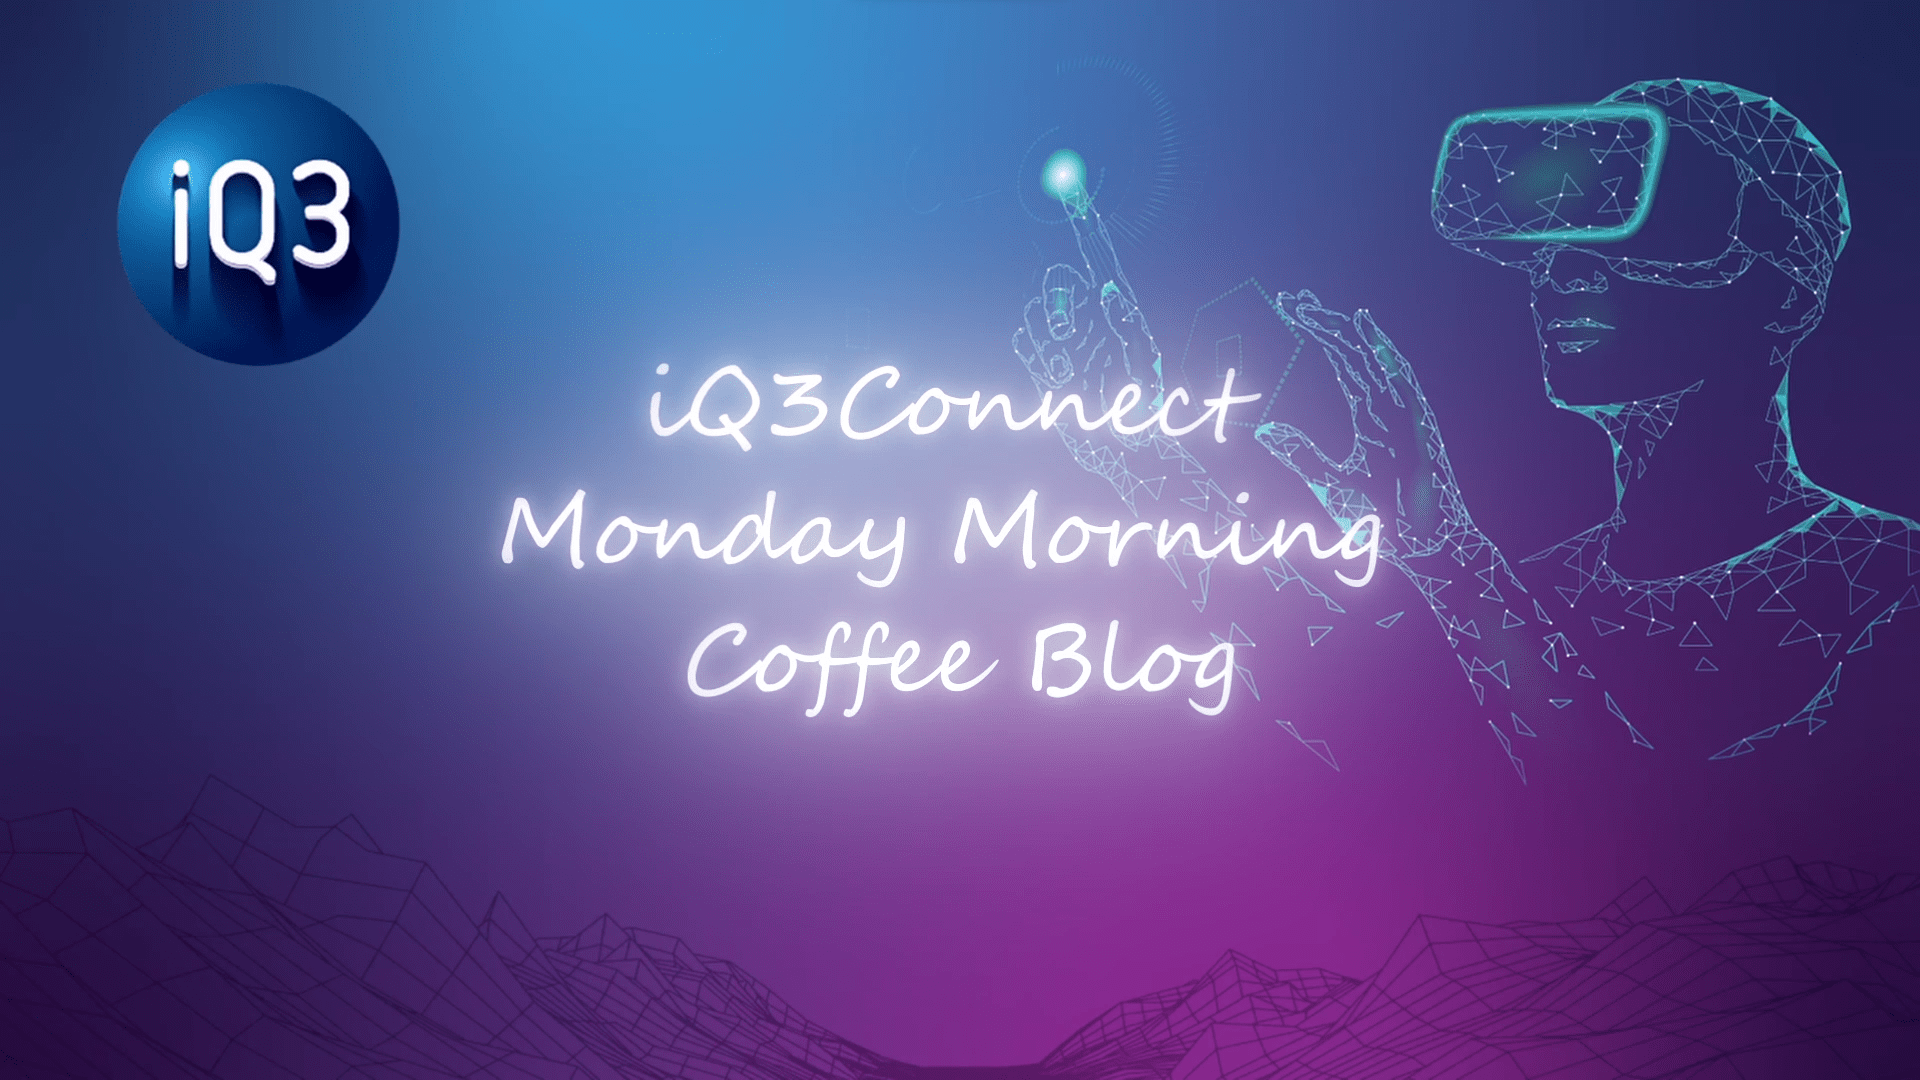 Monday Morning Coffee Blog - XR Terms